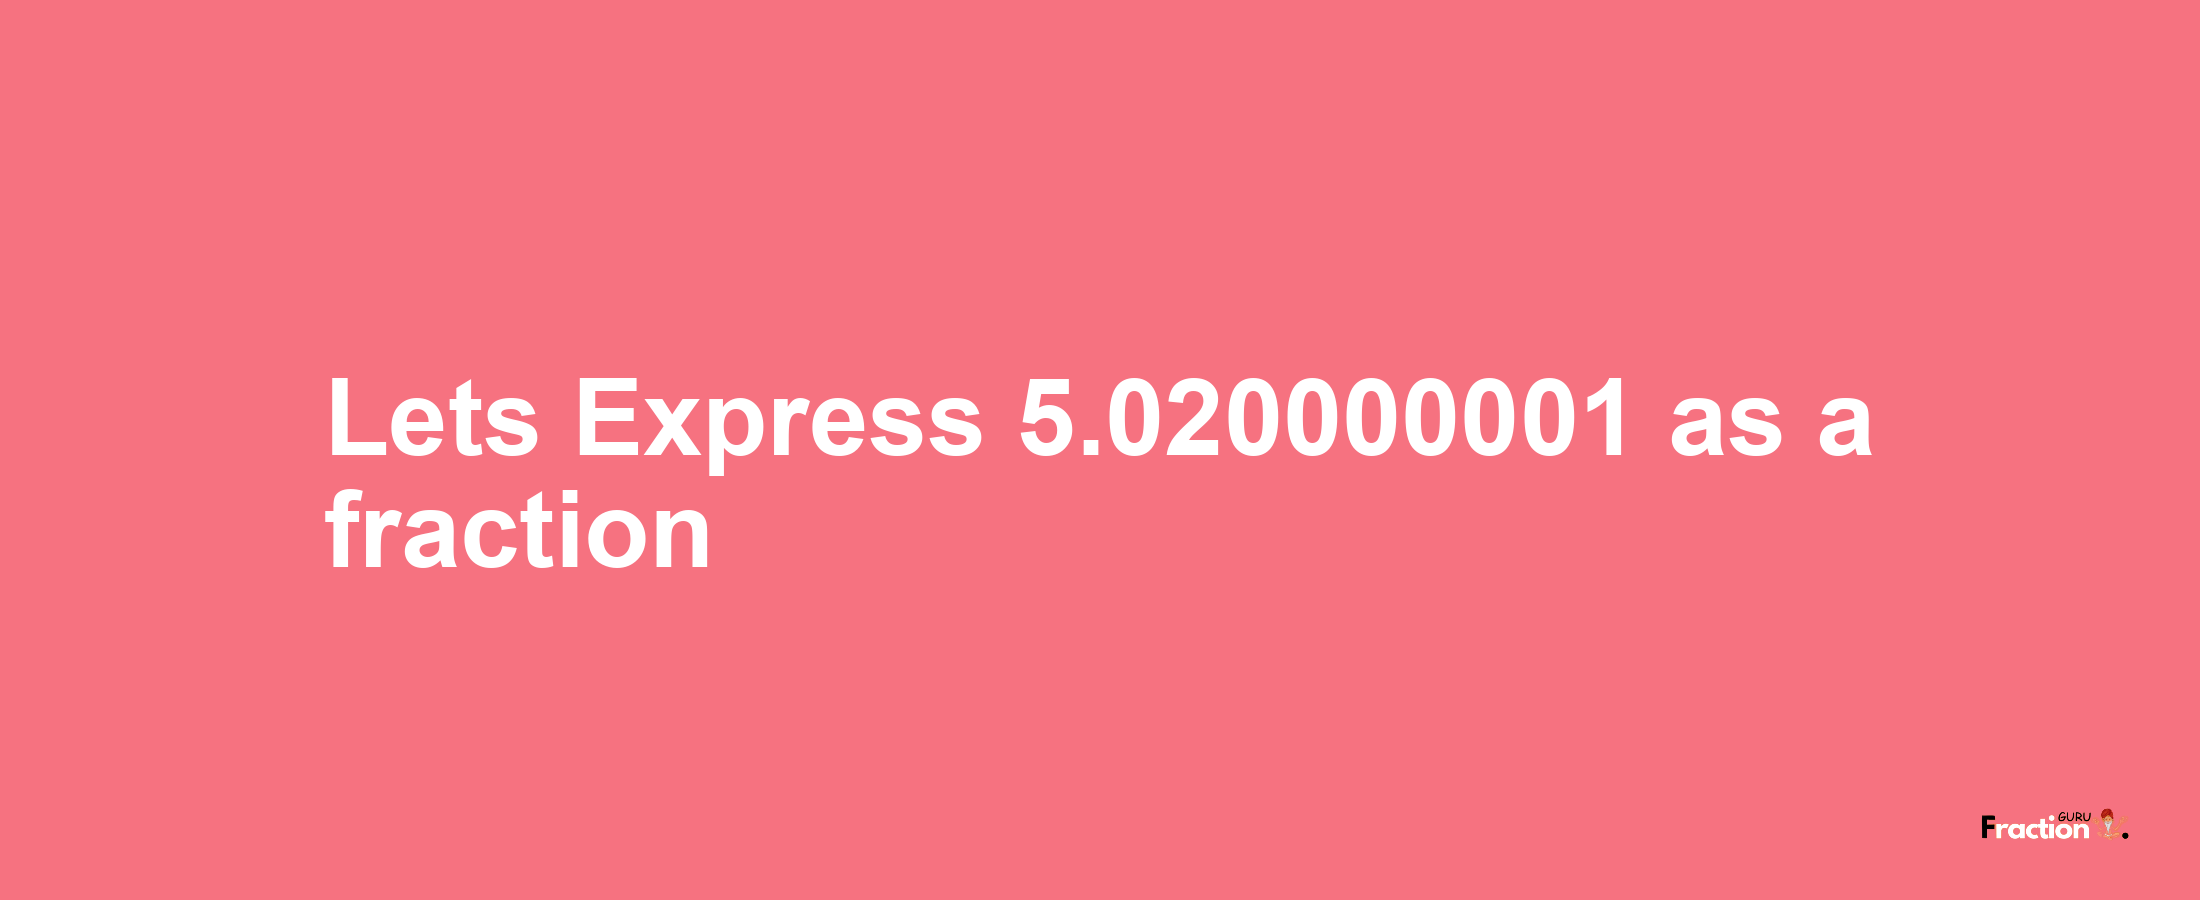 Lets Express 5.020000001 as afraction